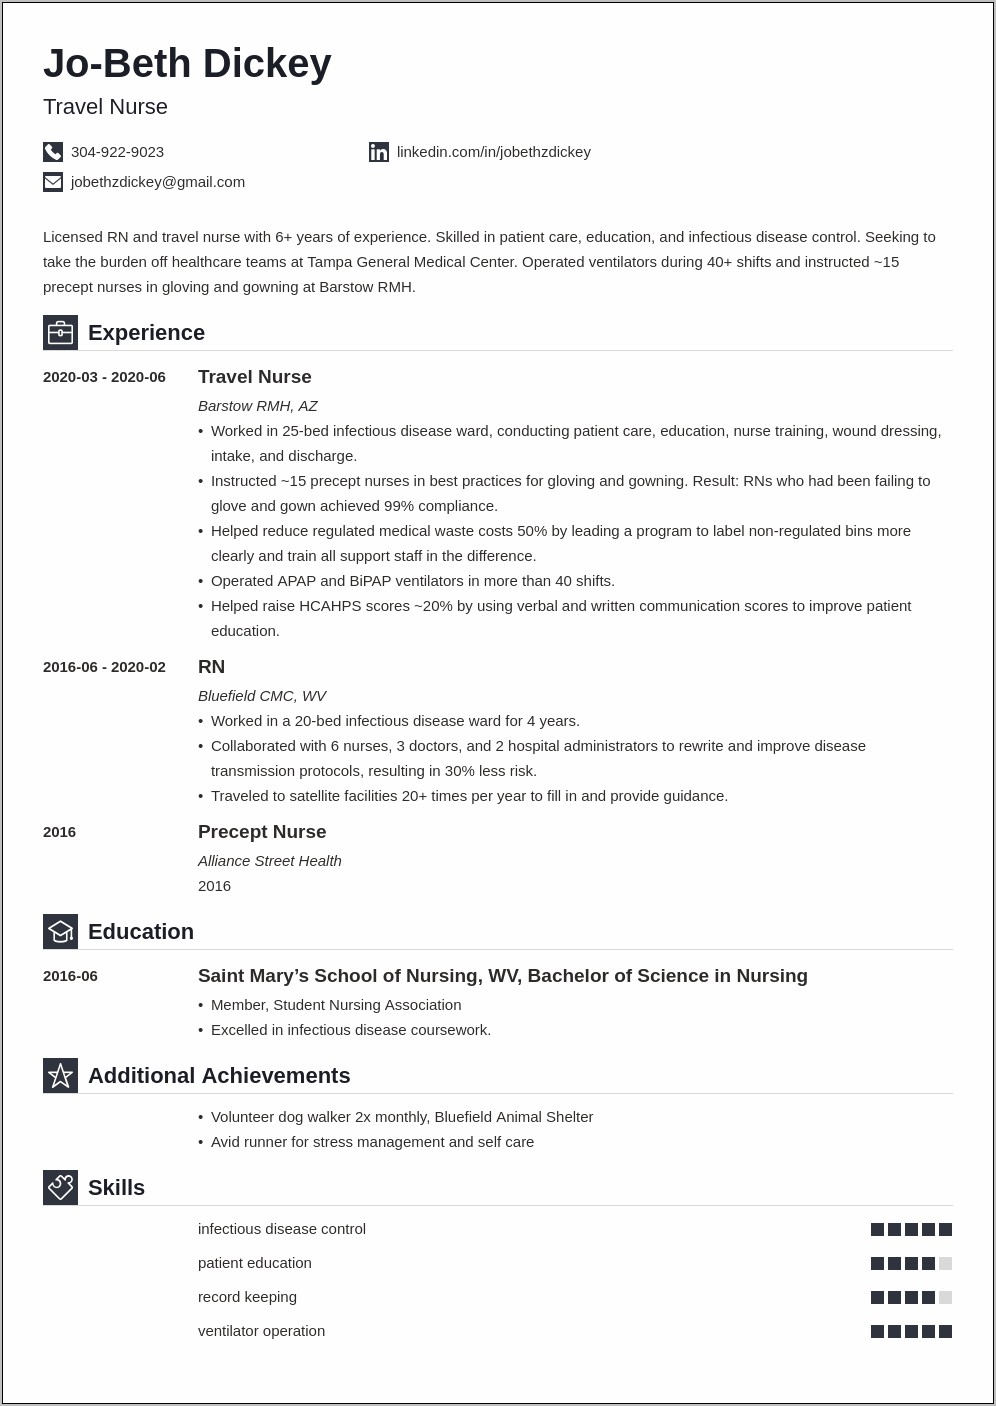 Resume With Lots Of Travel Experience Example